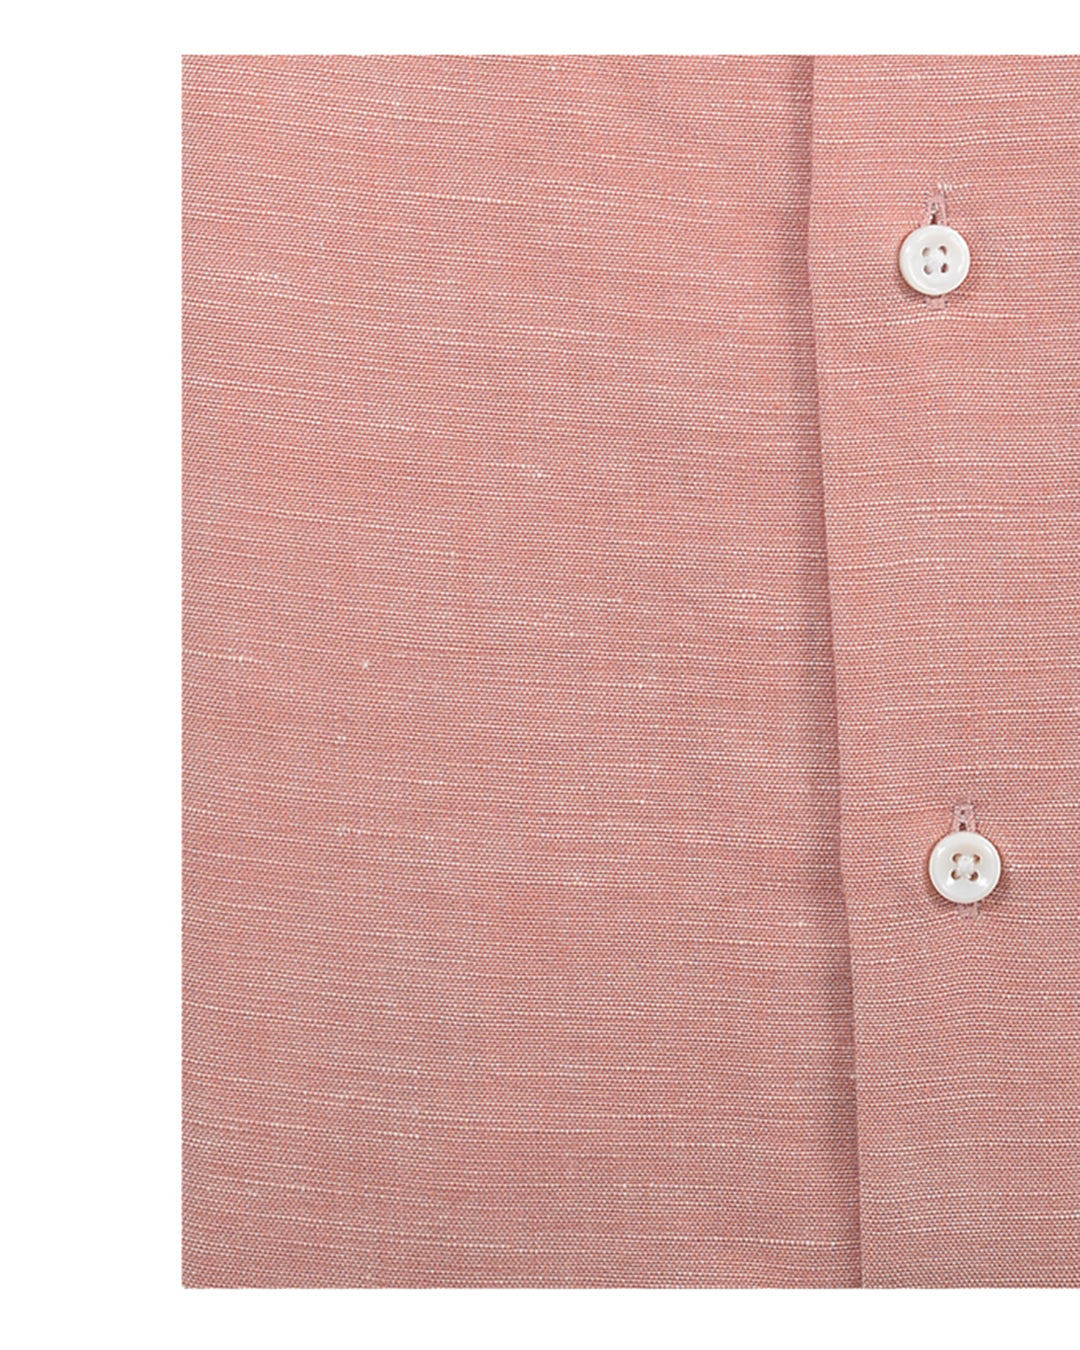 Close up of the custom linen shirt for men in plain red chambray by Luxire Clothing